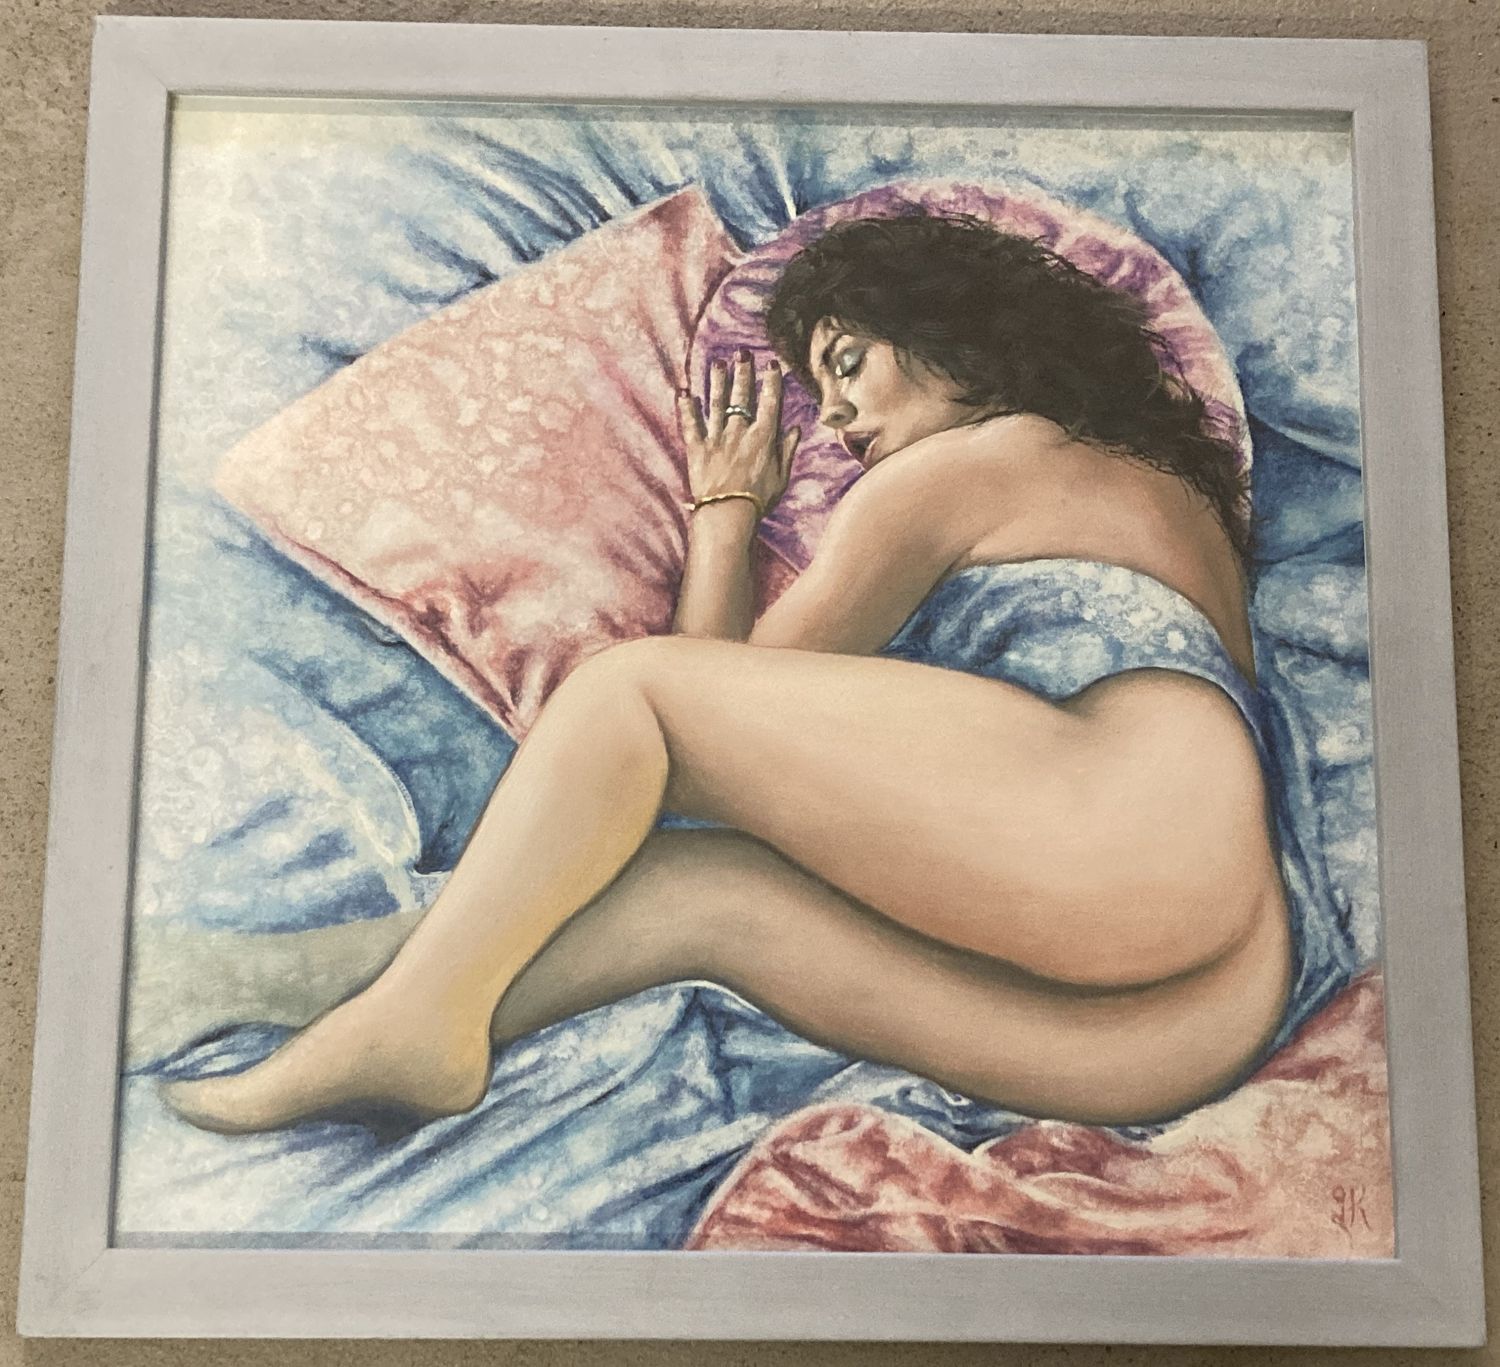 A framed and glazed original oil on board nude painting by Krys Leach, signed to bottom right.